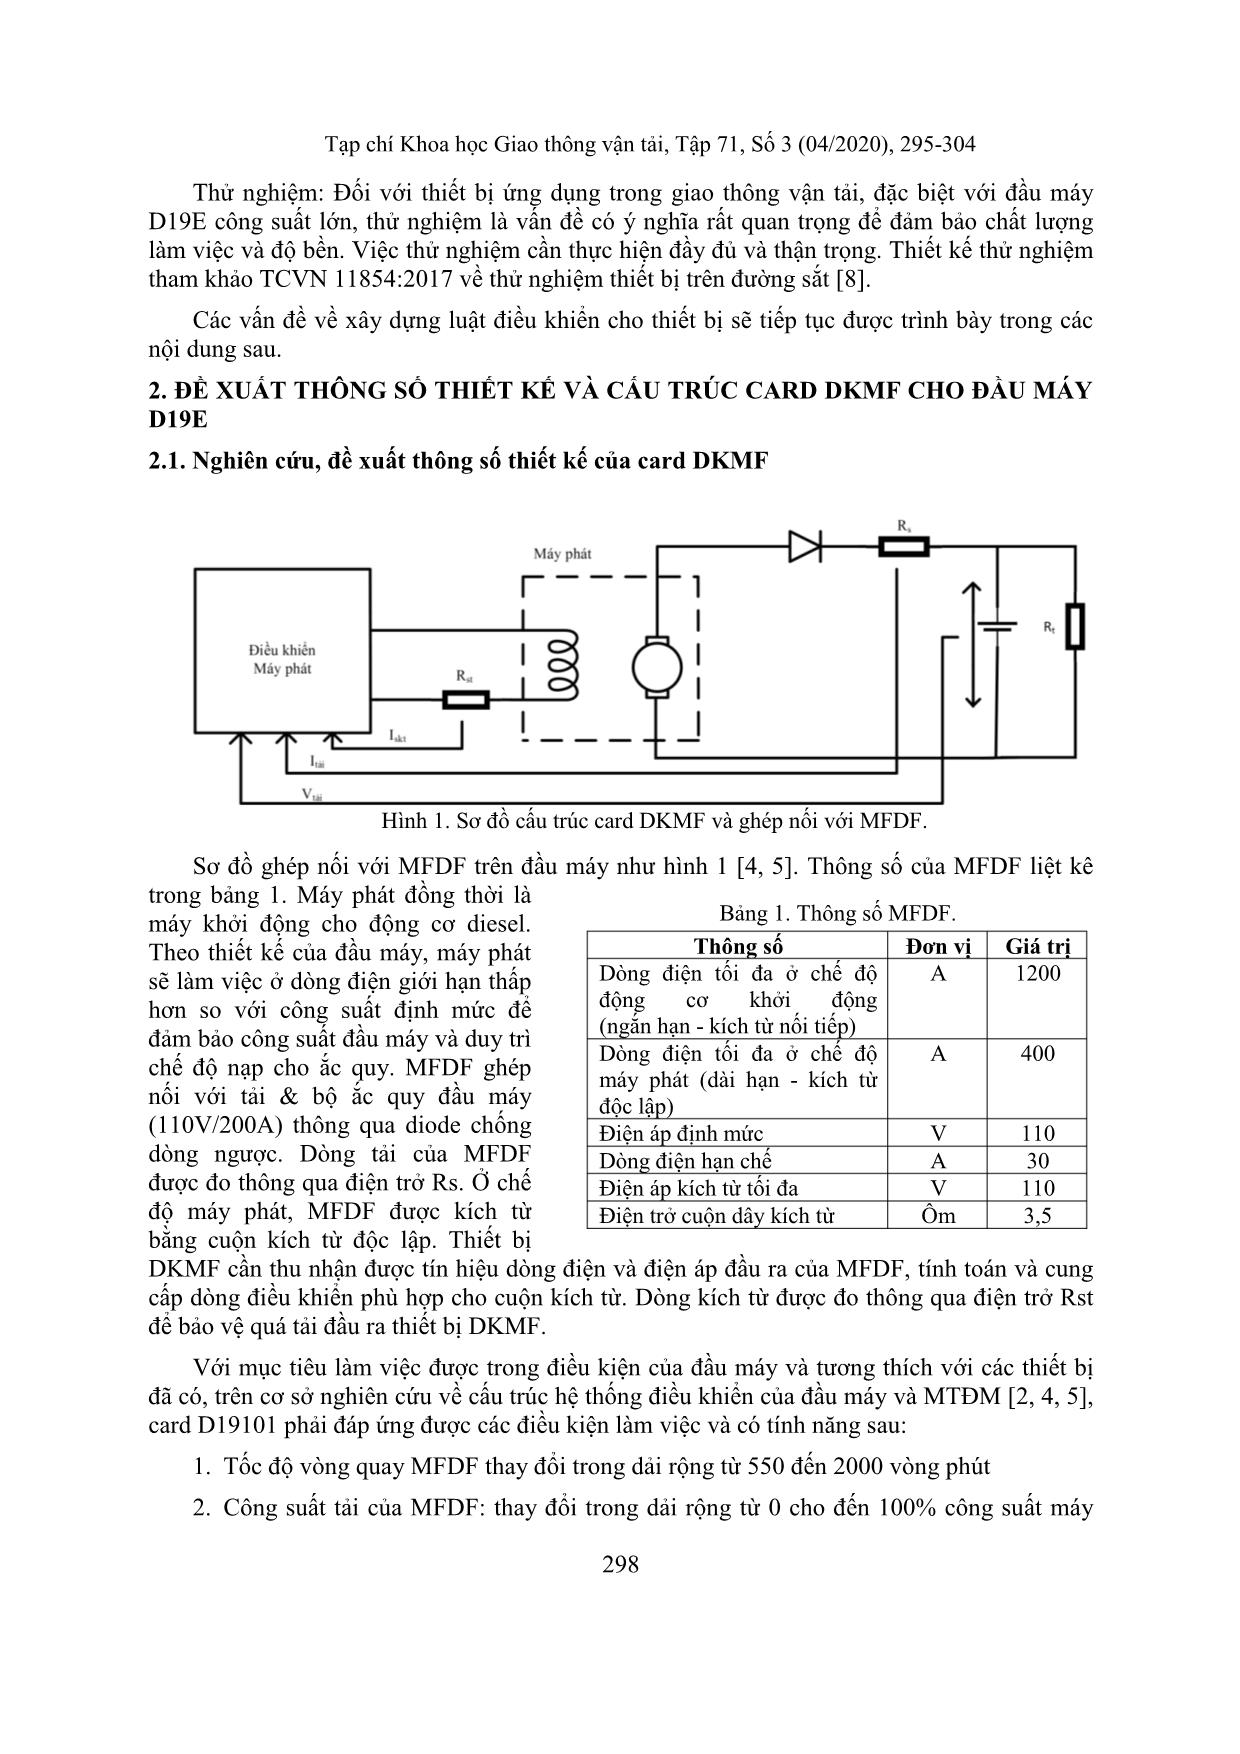 Research to design and test card for controling auxiliary generator on d19e locomotive trang 4